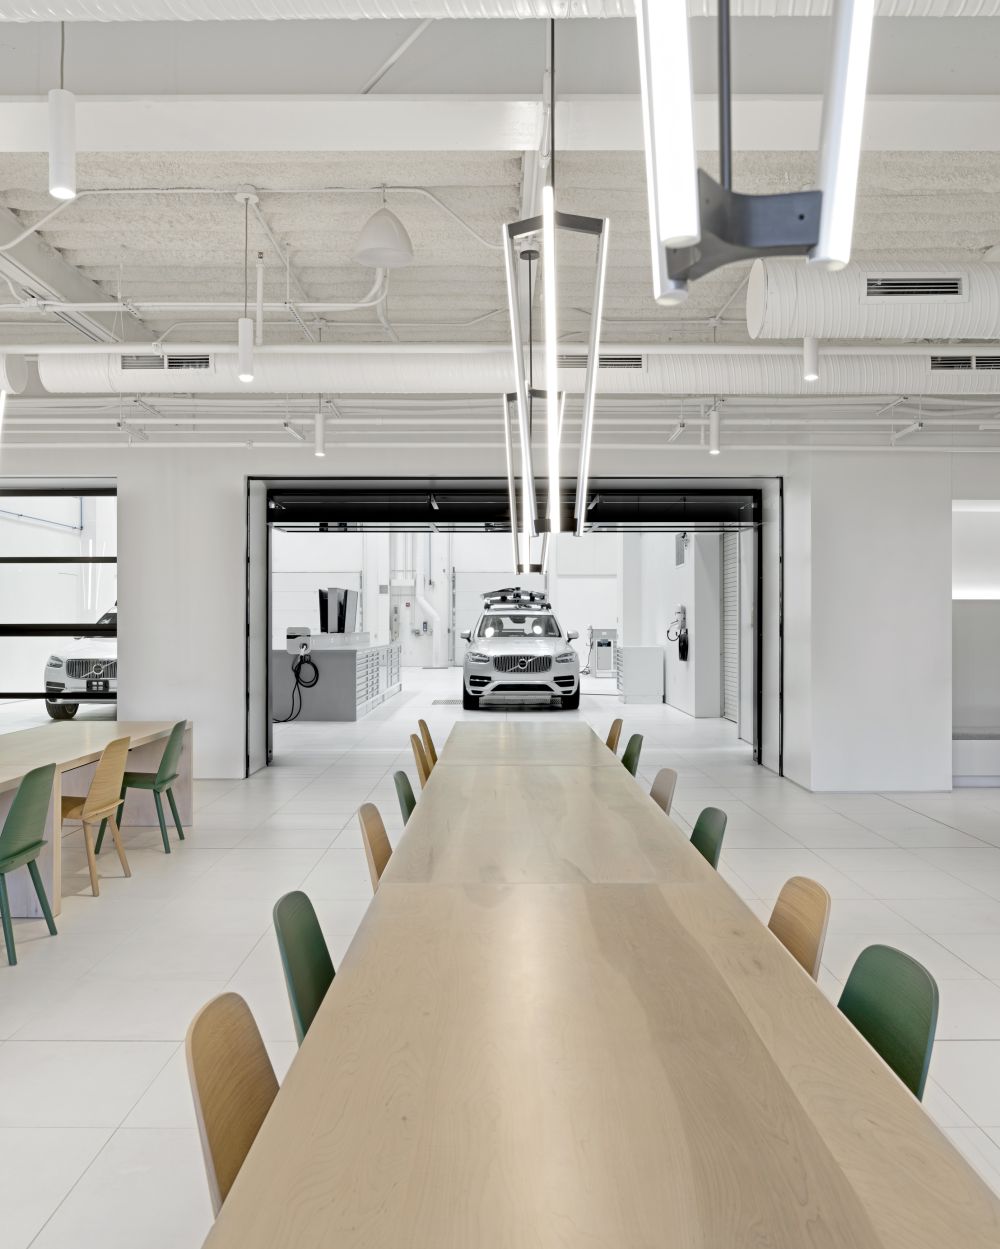 Uber Advanced Technology Group Center | CannonDesign | CannonDesign